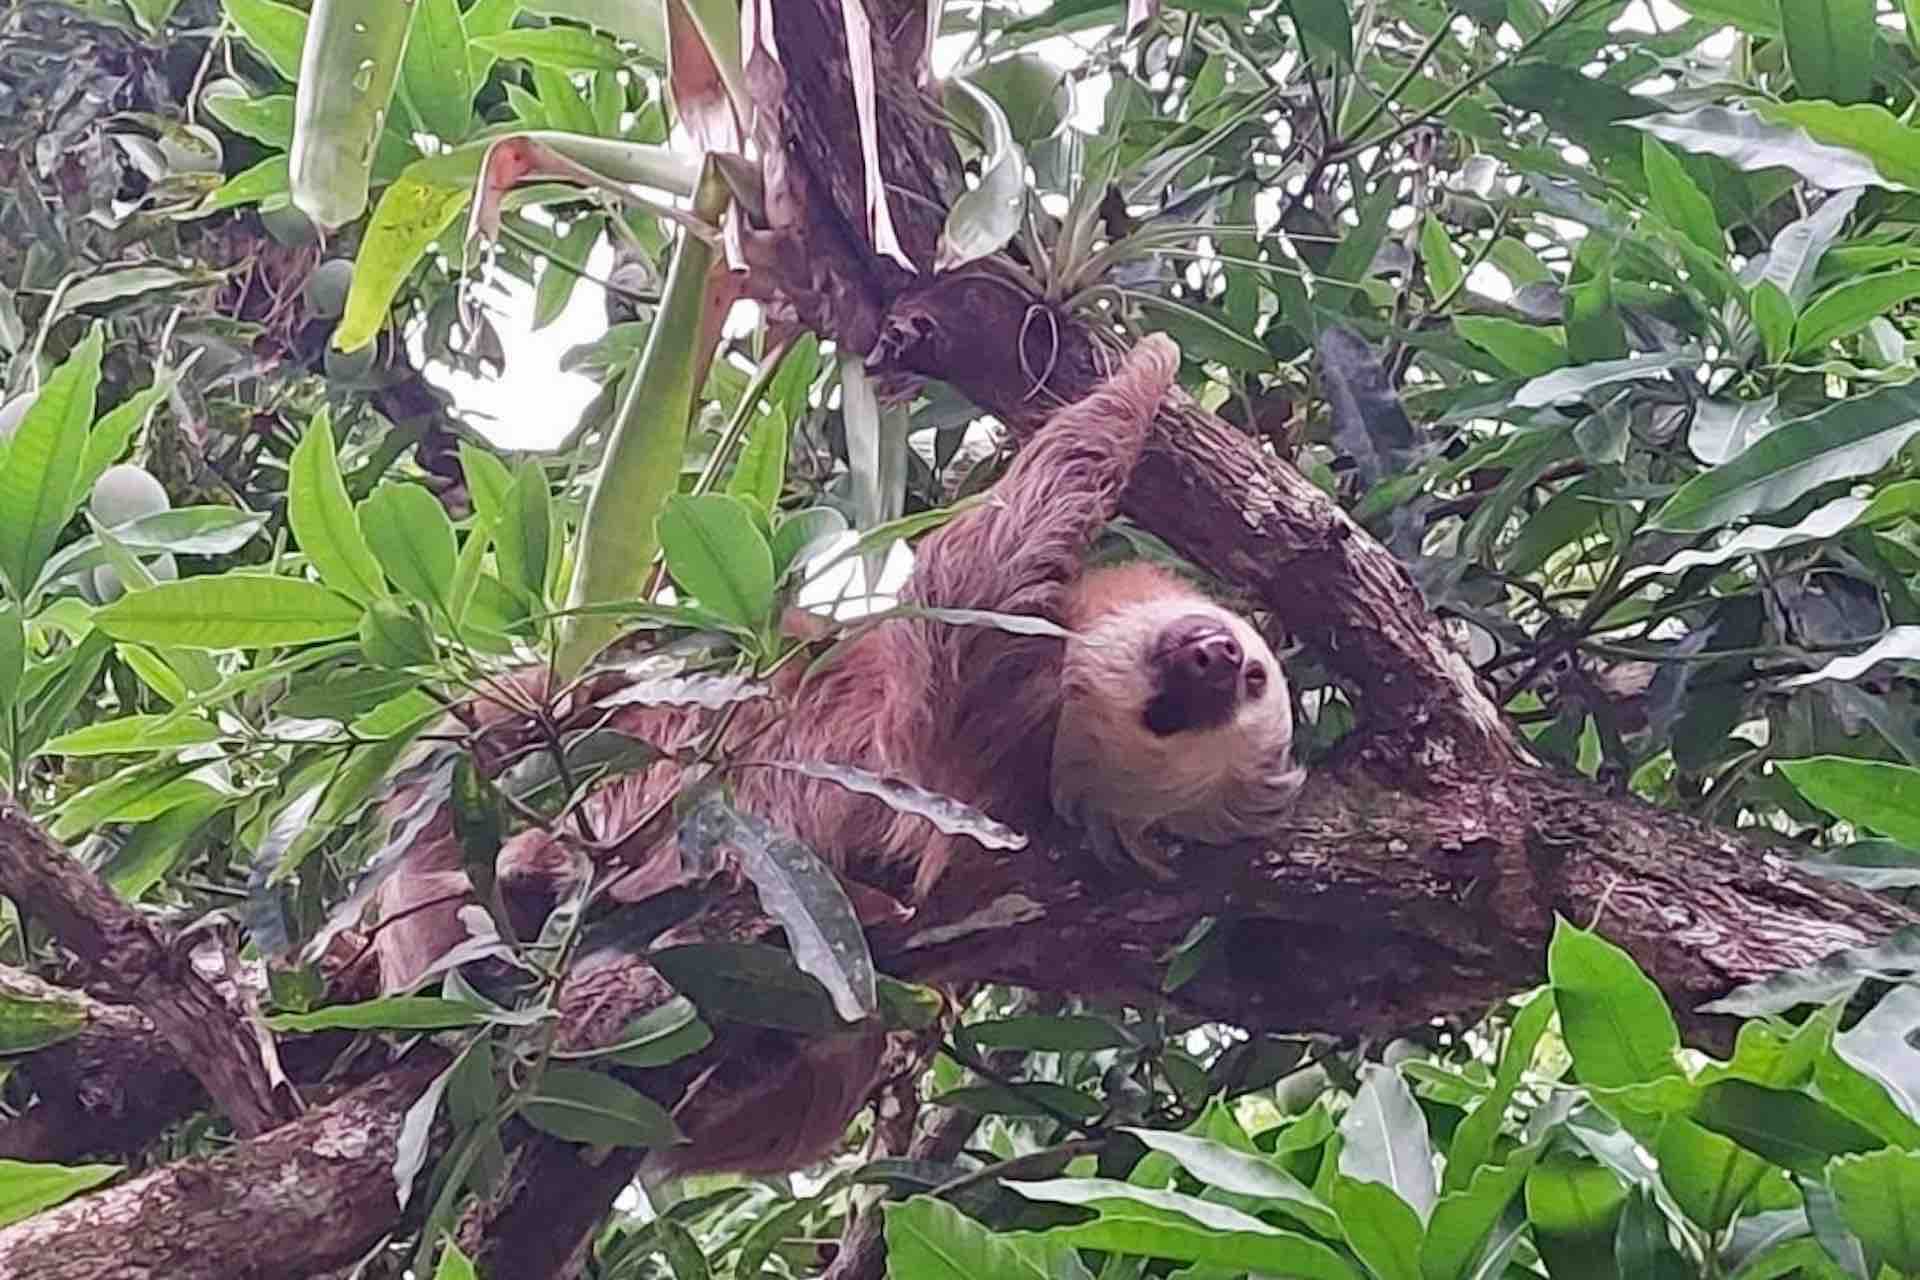 Chagres National Park lodge sloth in tree